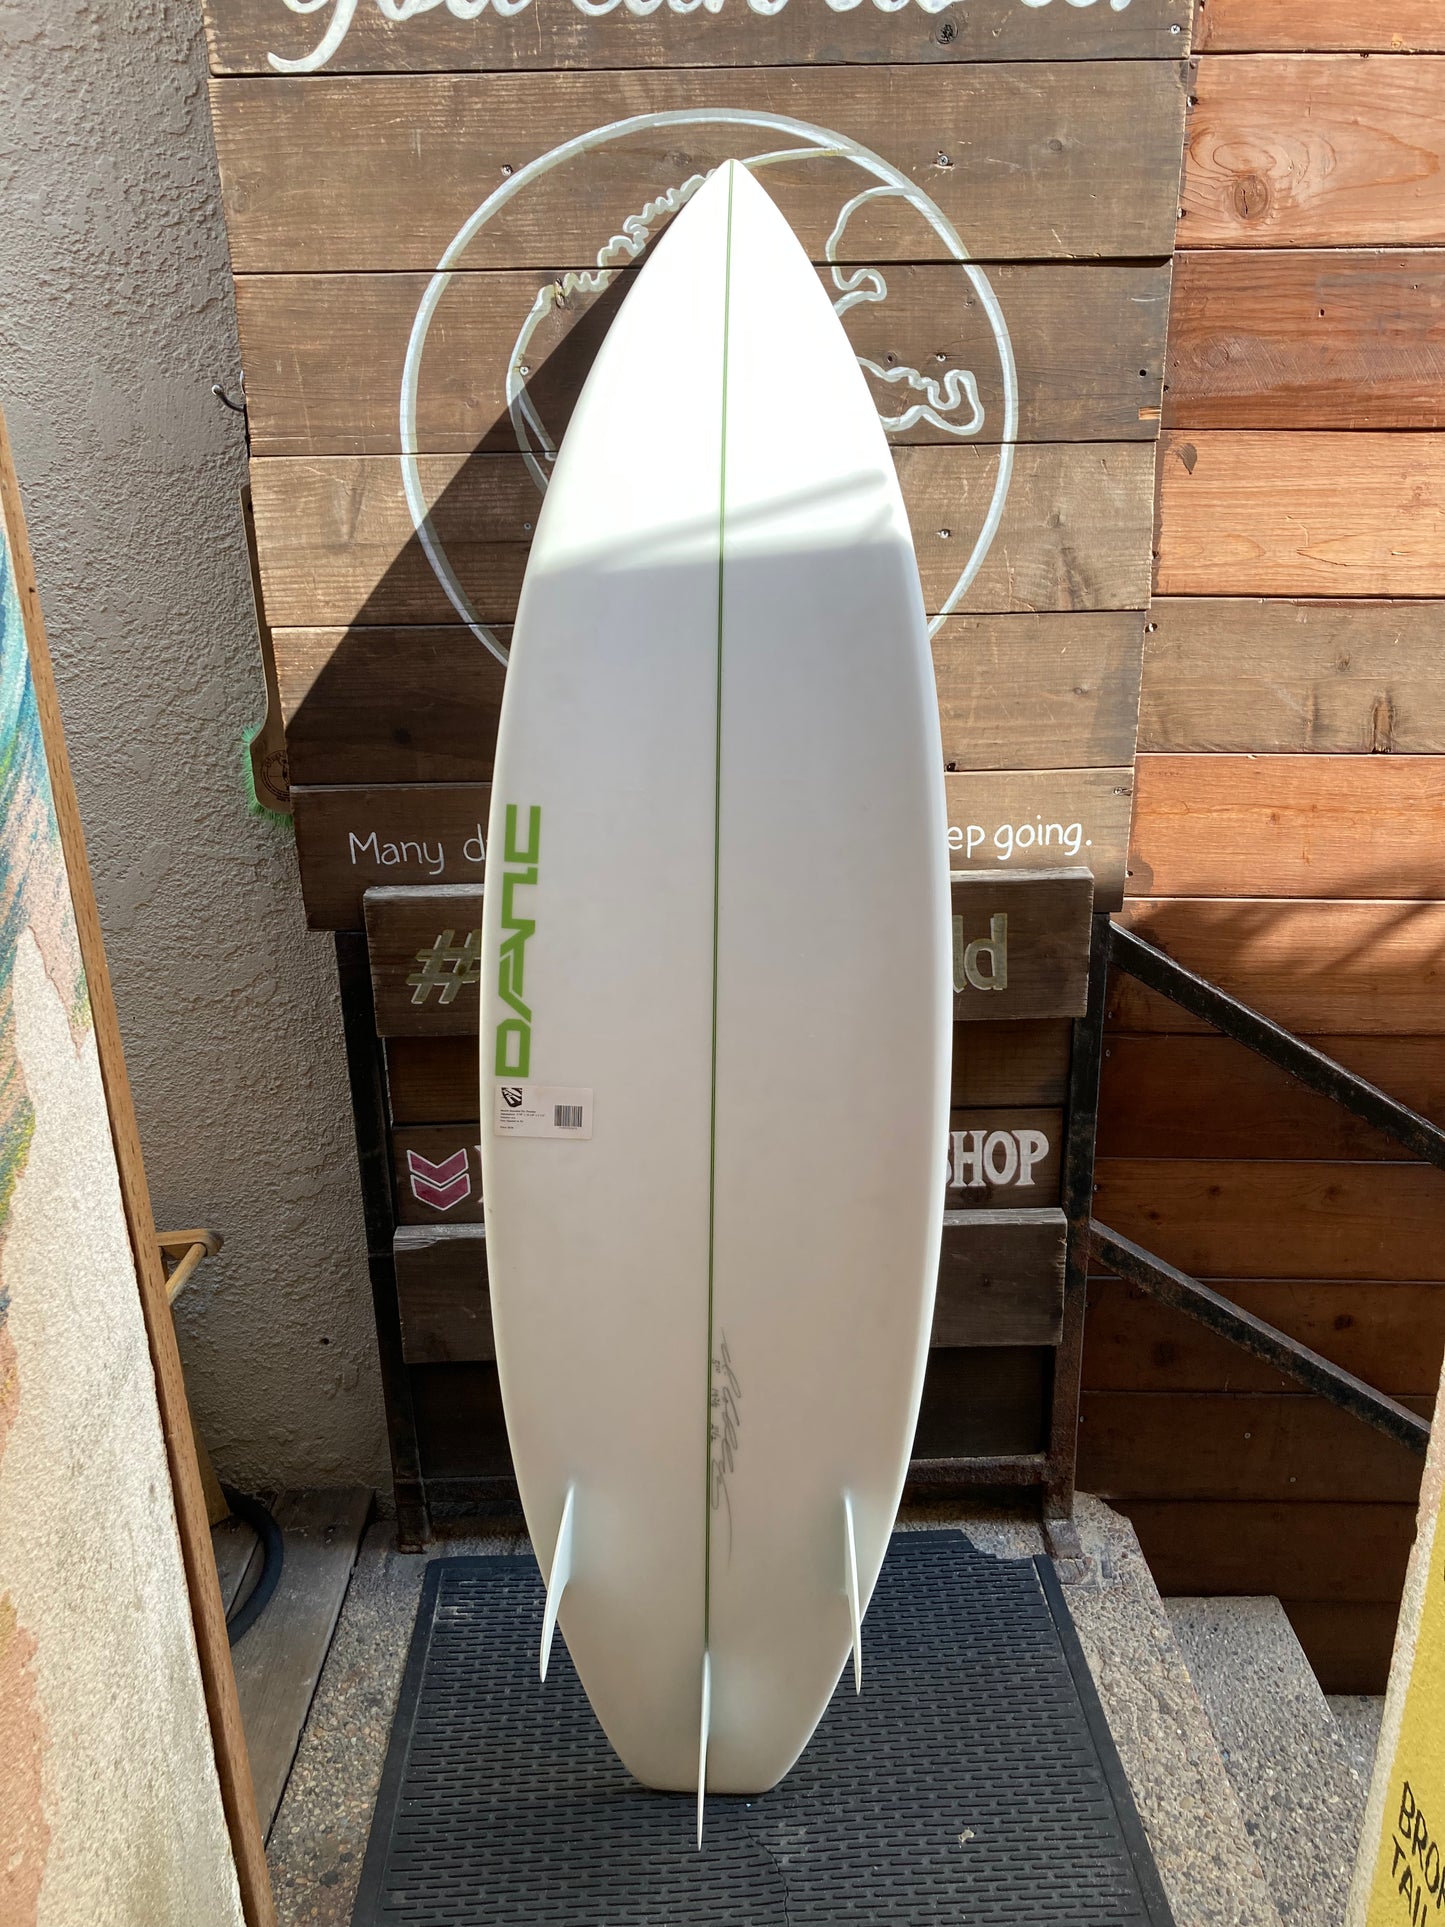 DANC Rounded Pin Thruster 5'10 Surfboard